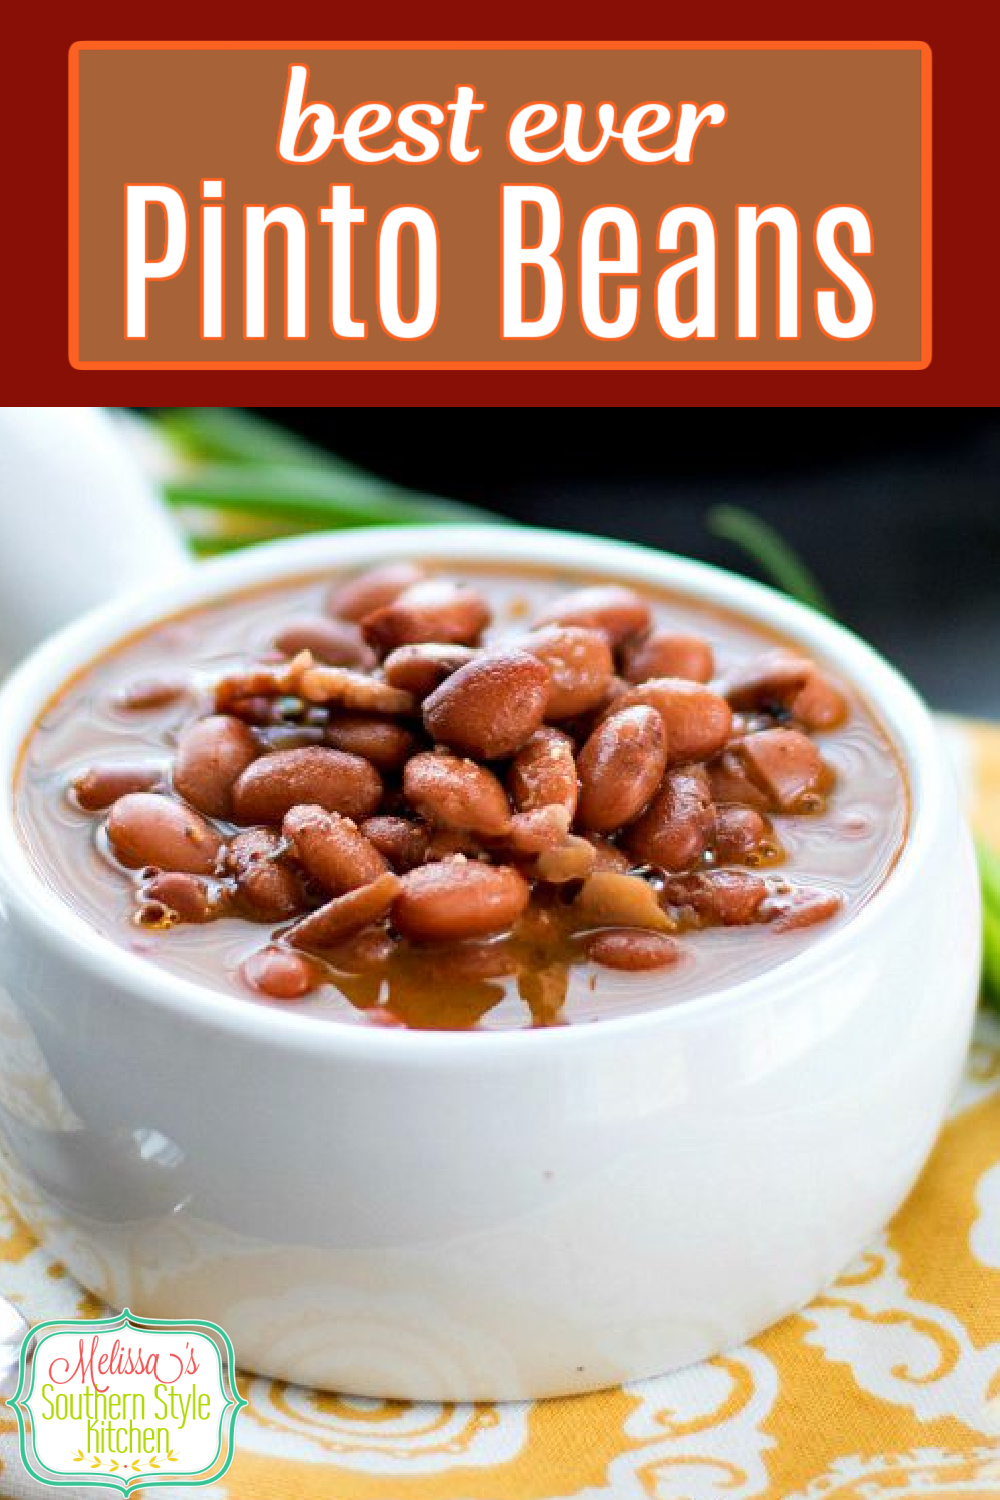 The addition of bacon and a fresh blend of seasonings elevates this budget friendly Southern classic #pintobeans #perfectpintobeans #beansrecipes #southernfood #dinner #dinnerideas #familyfriendly #budgetfriendlyrecipes #beans #brownbeans #maindish #sidedishrecipes #southernrecipes